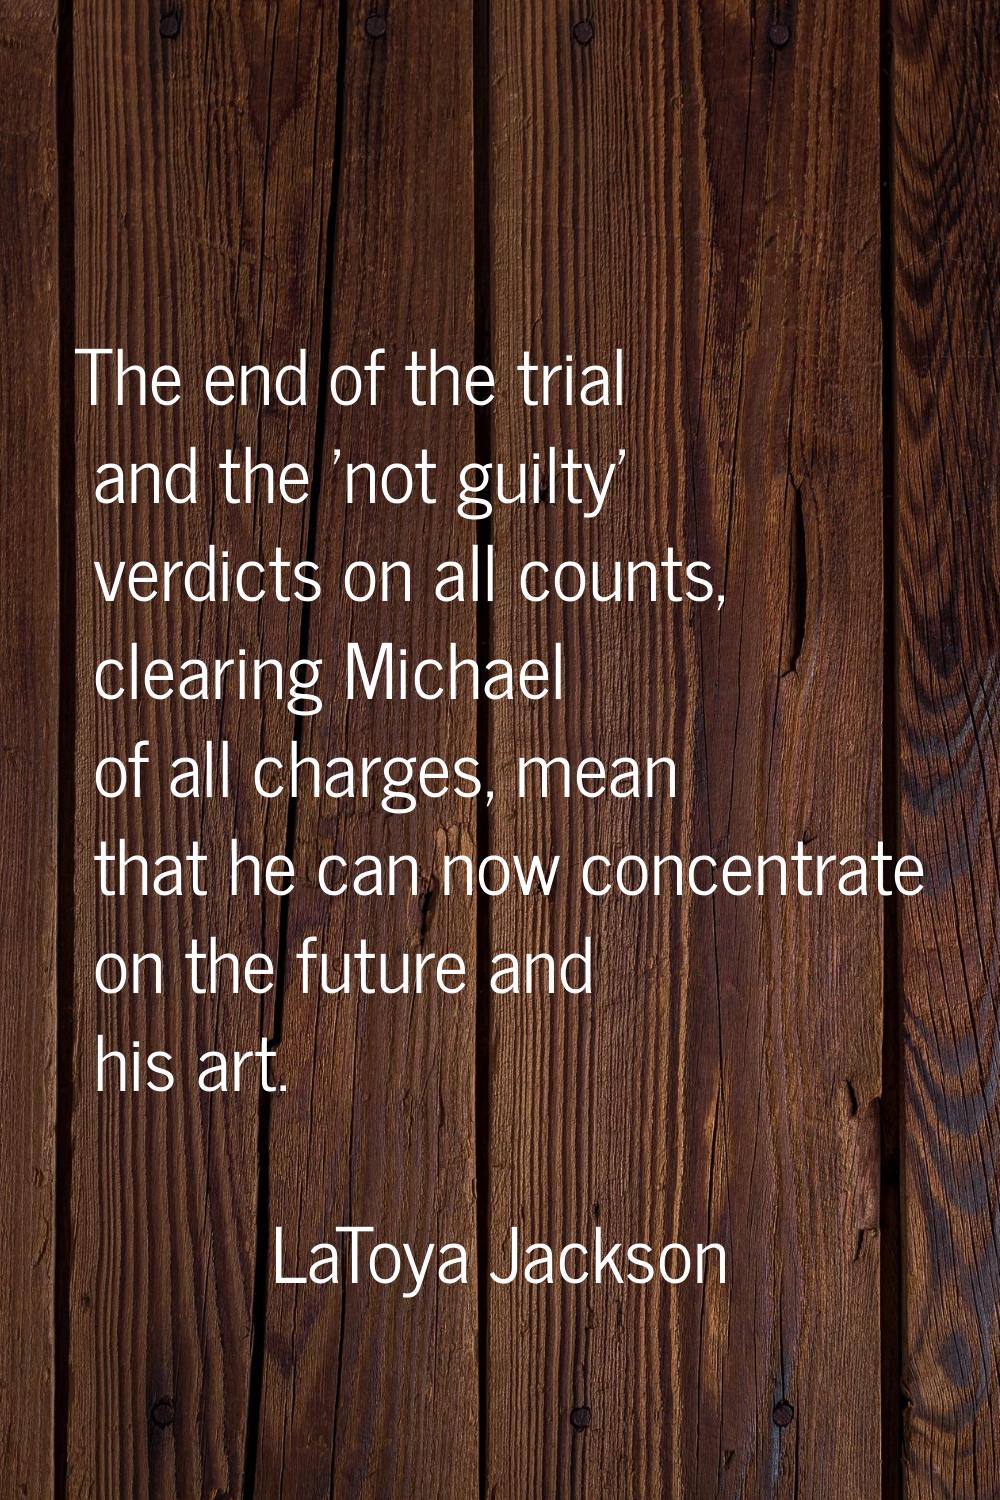 The end of the trial and the 'not guilty' verdicts on all counts, clearing Michael of all charges, 